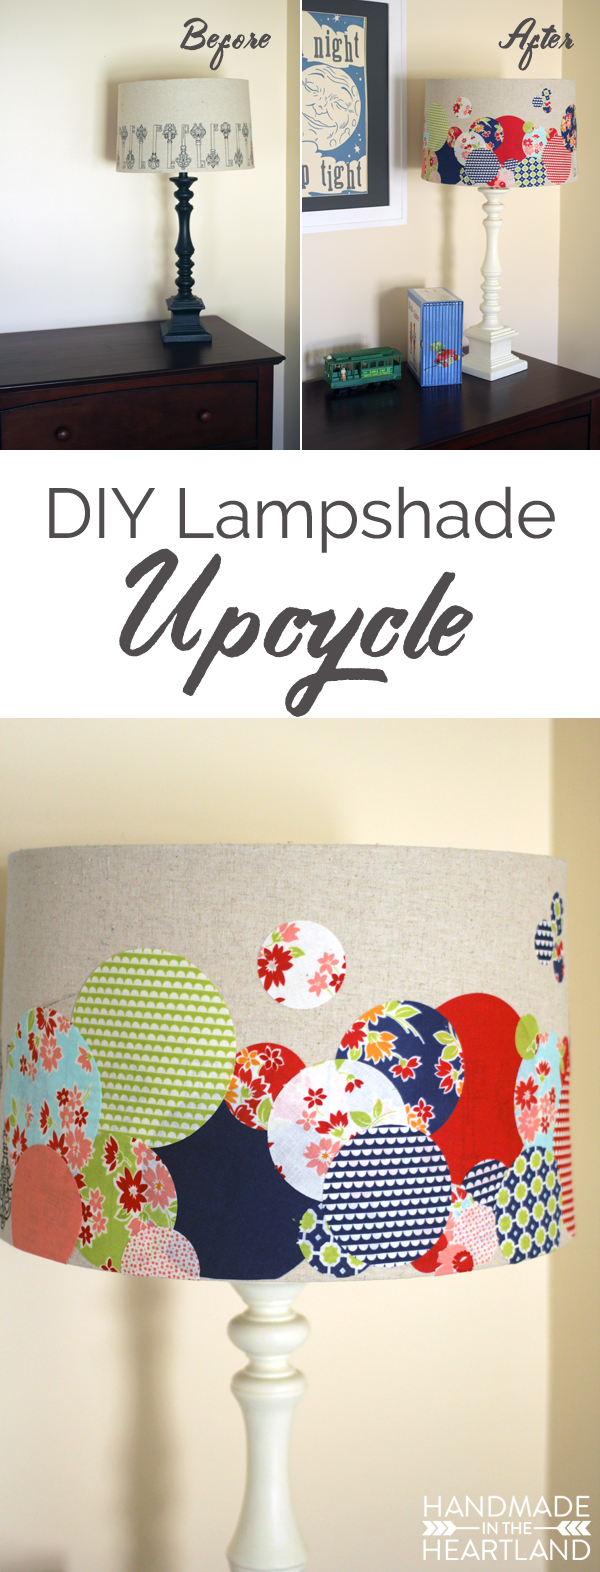 DIY Lampshade Upcycle with Cricut